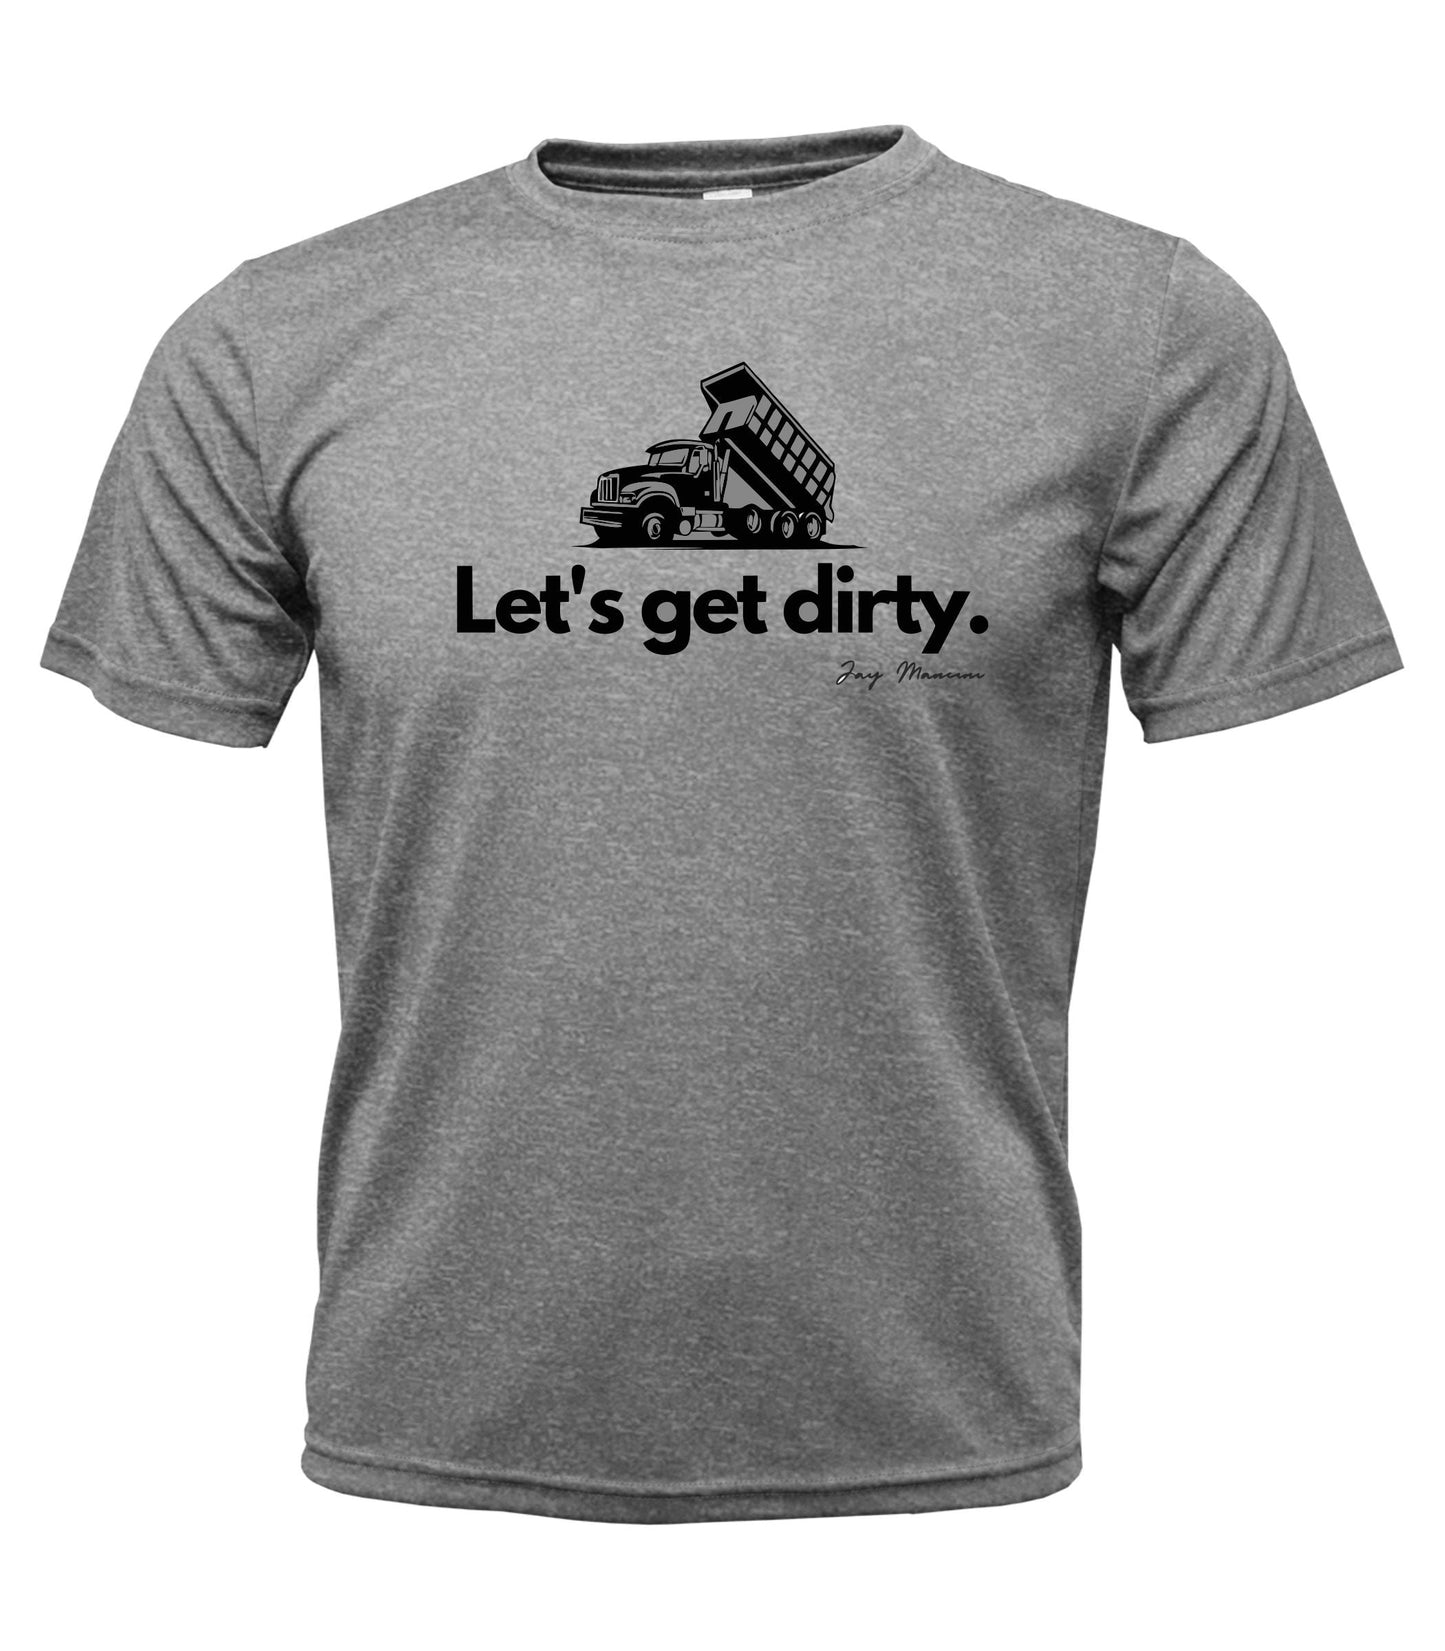 Let's get dirty - Dri-fit T-shirt